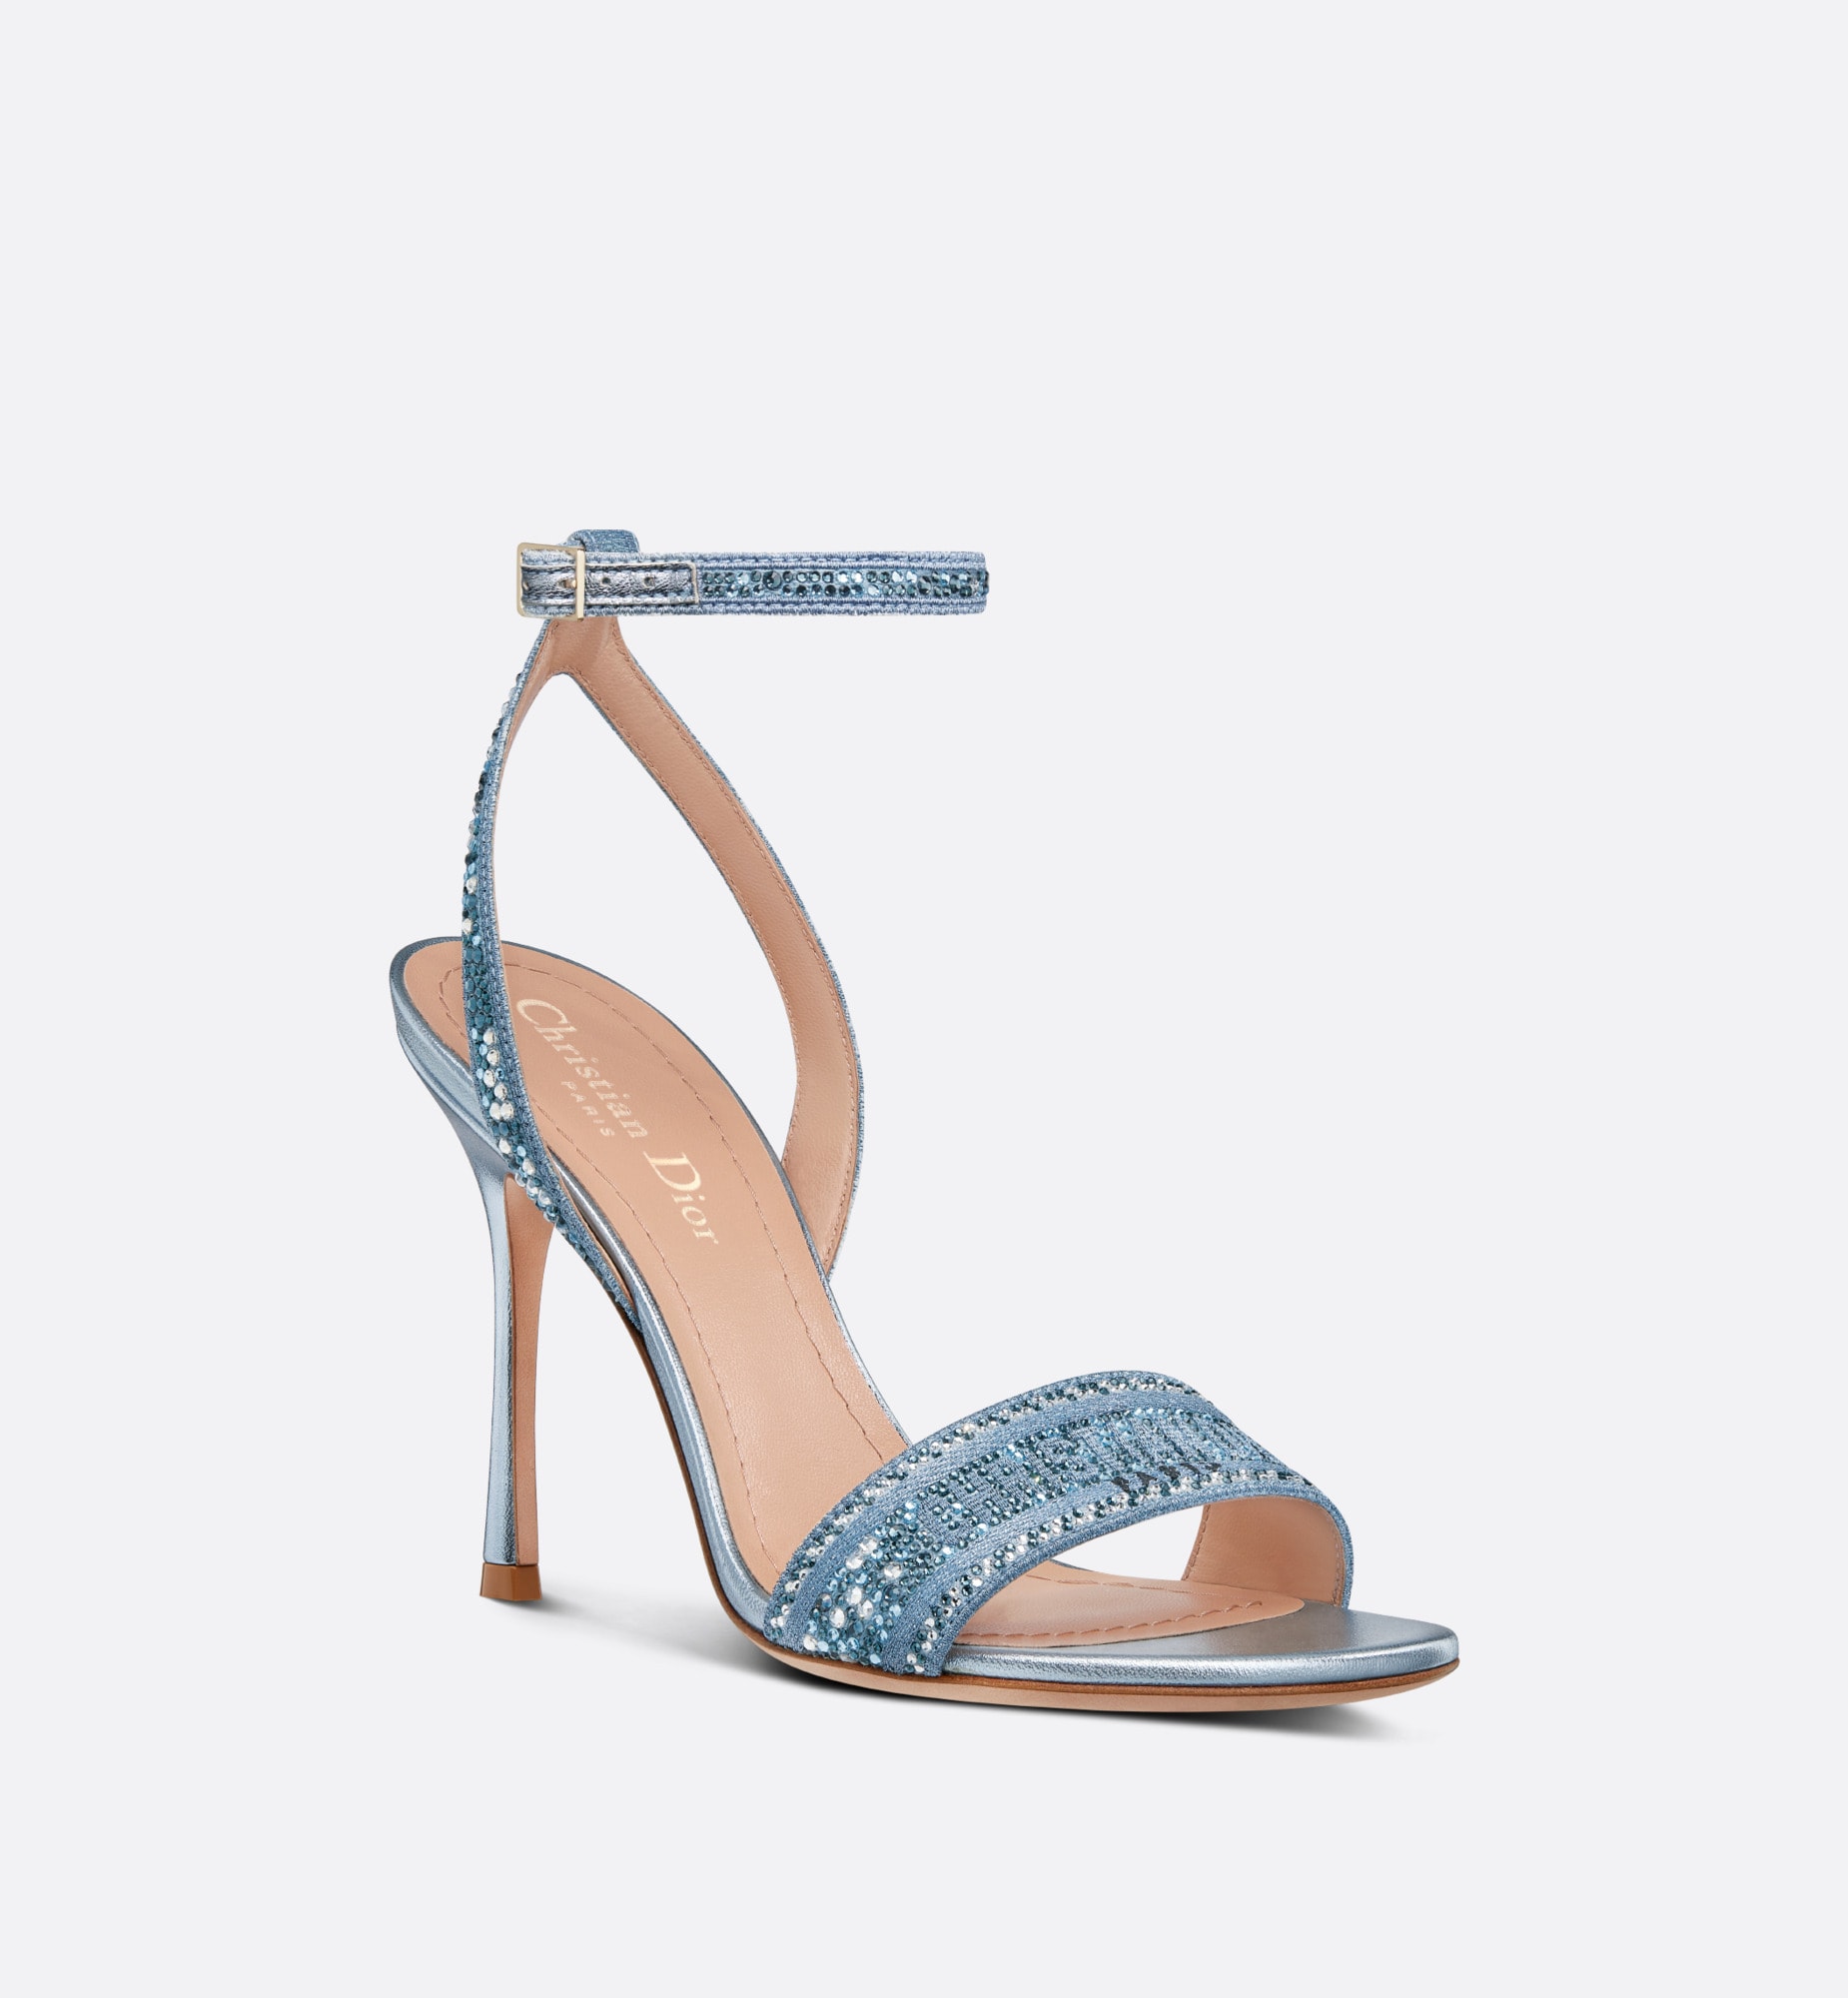 Dway Heeled Sandal Blue Cotton Embroidered with Metallic Thread and Strass christian dior dway sandals